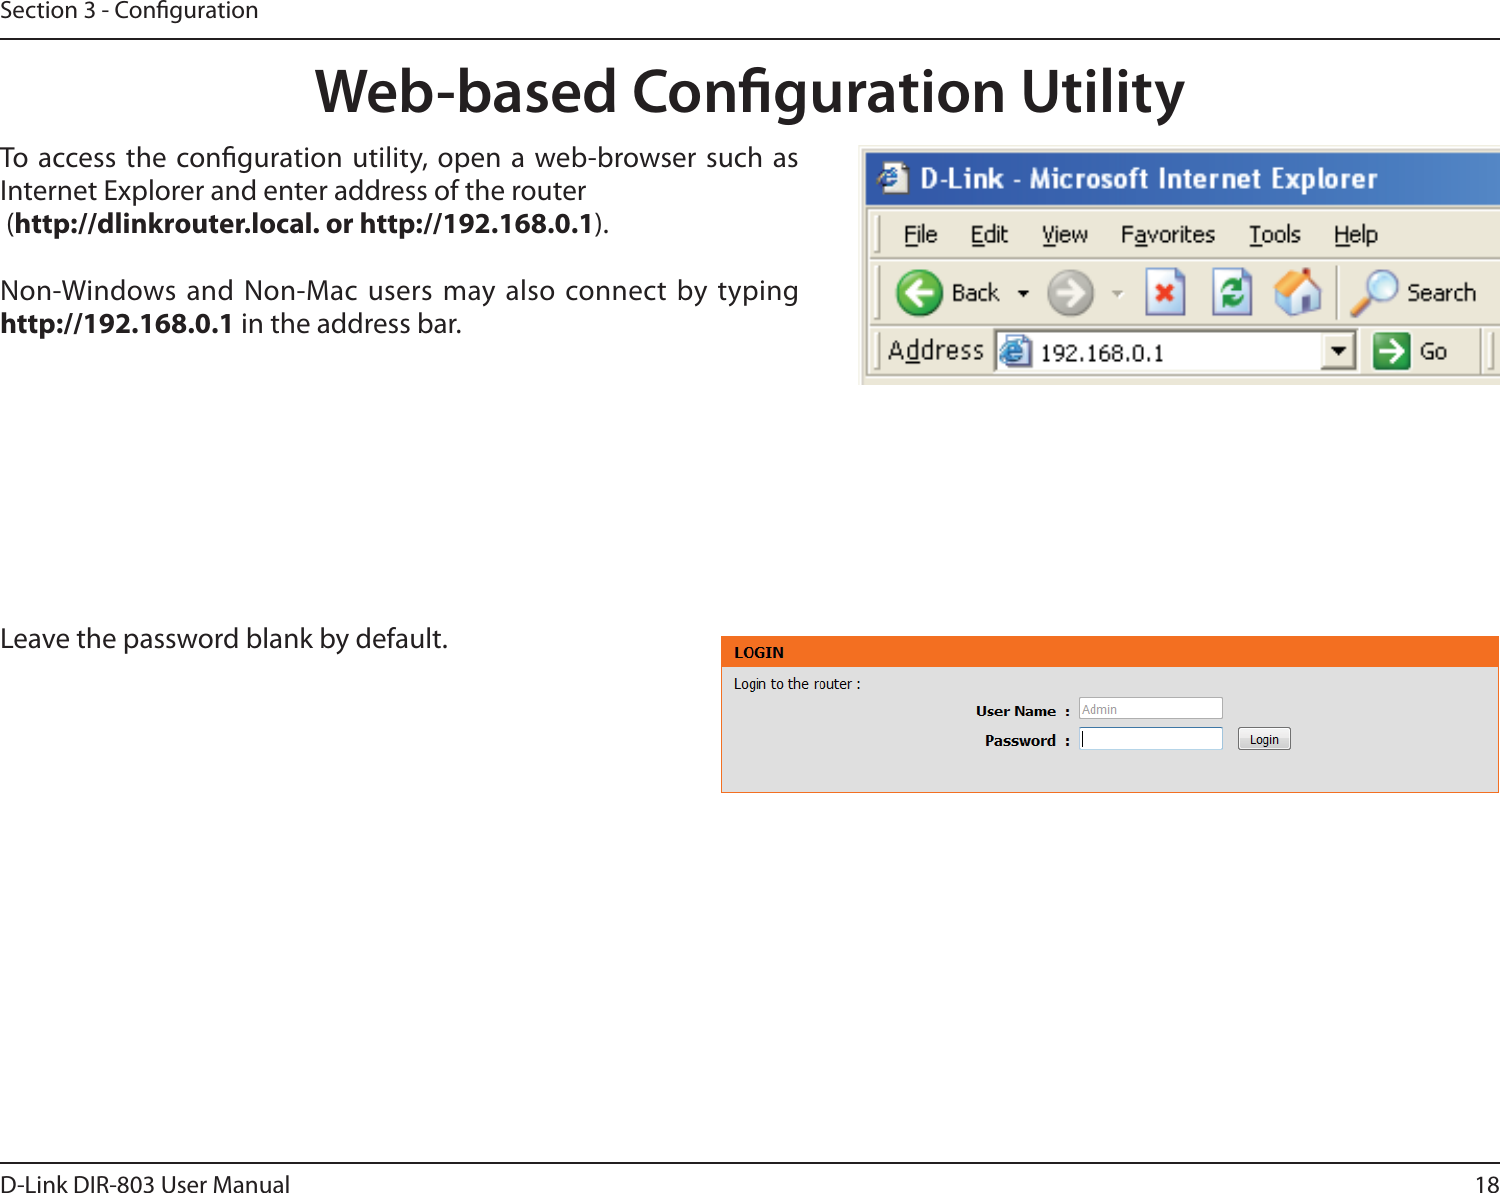 18D-Link DIR-803 User ManualSection 3 - CongurationWeb-based Conguration UtilityLeave the password blank by default.To access the conguration utility, open a web-browser such as Internet Explorer and enter address of the router (http://dlinkrouter.local. or http://192.168.0.1).Non-Windows and Non-Mac users may also connect by typing http://192.168.0.1 in the address bar.